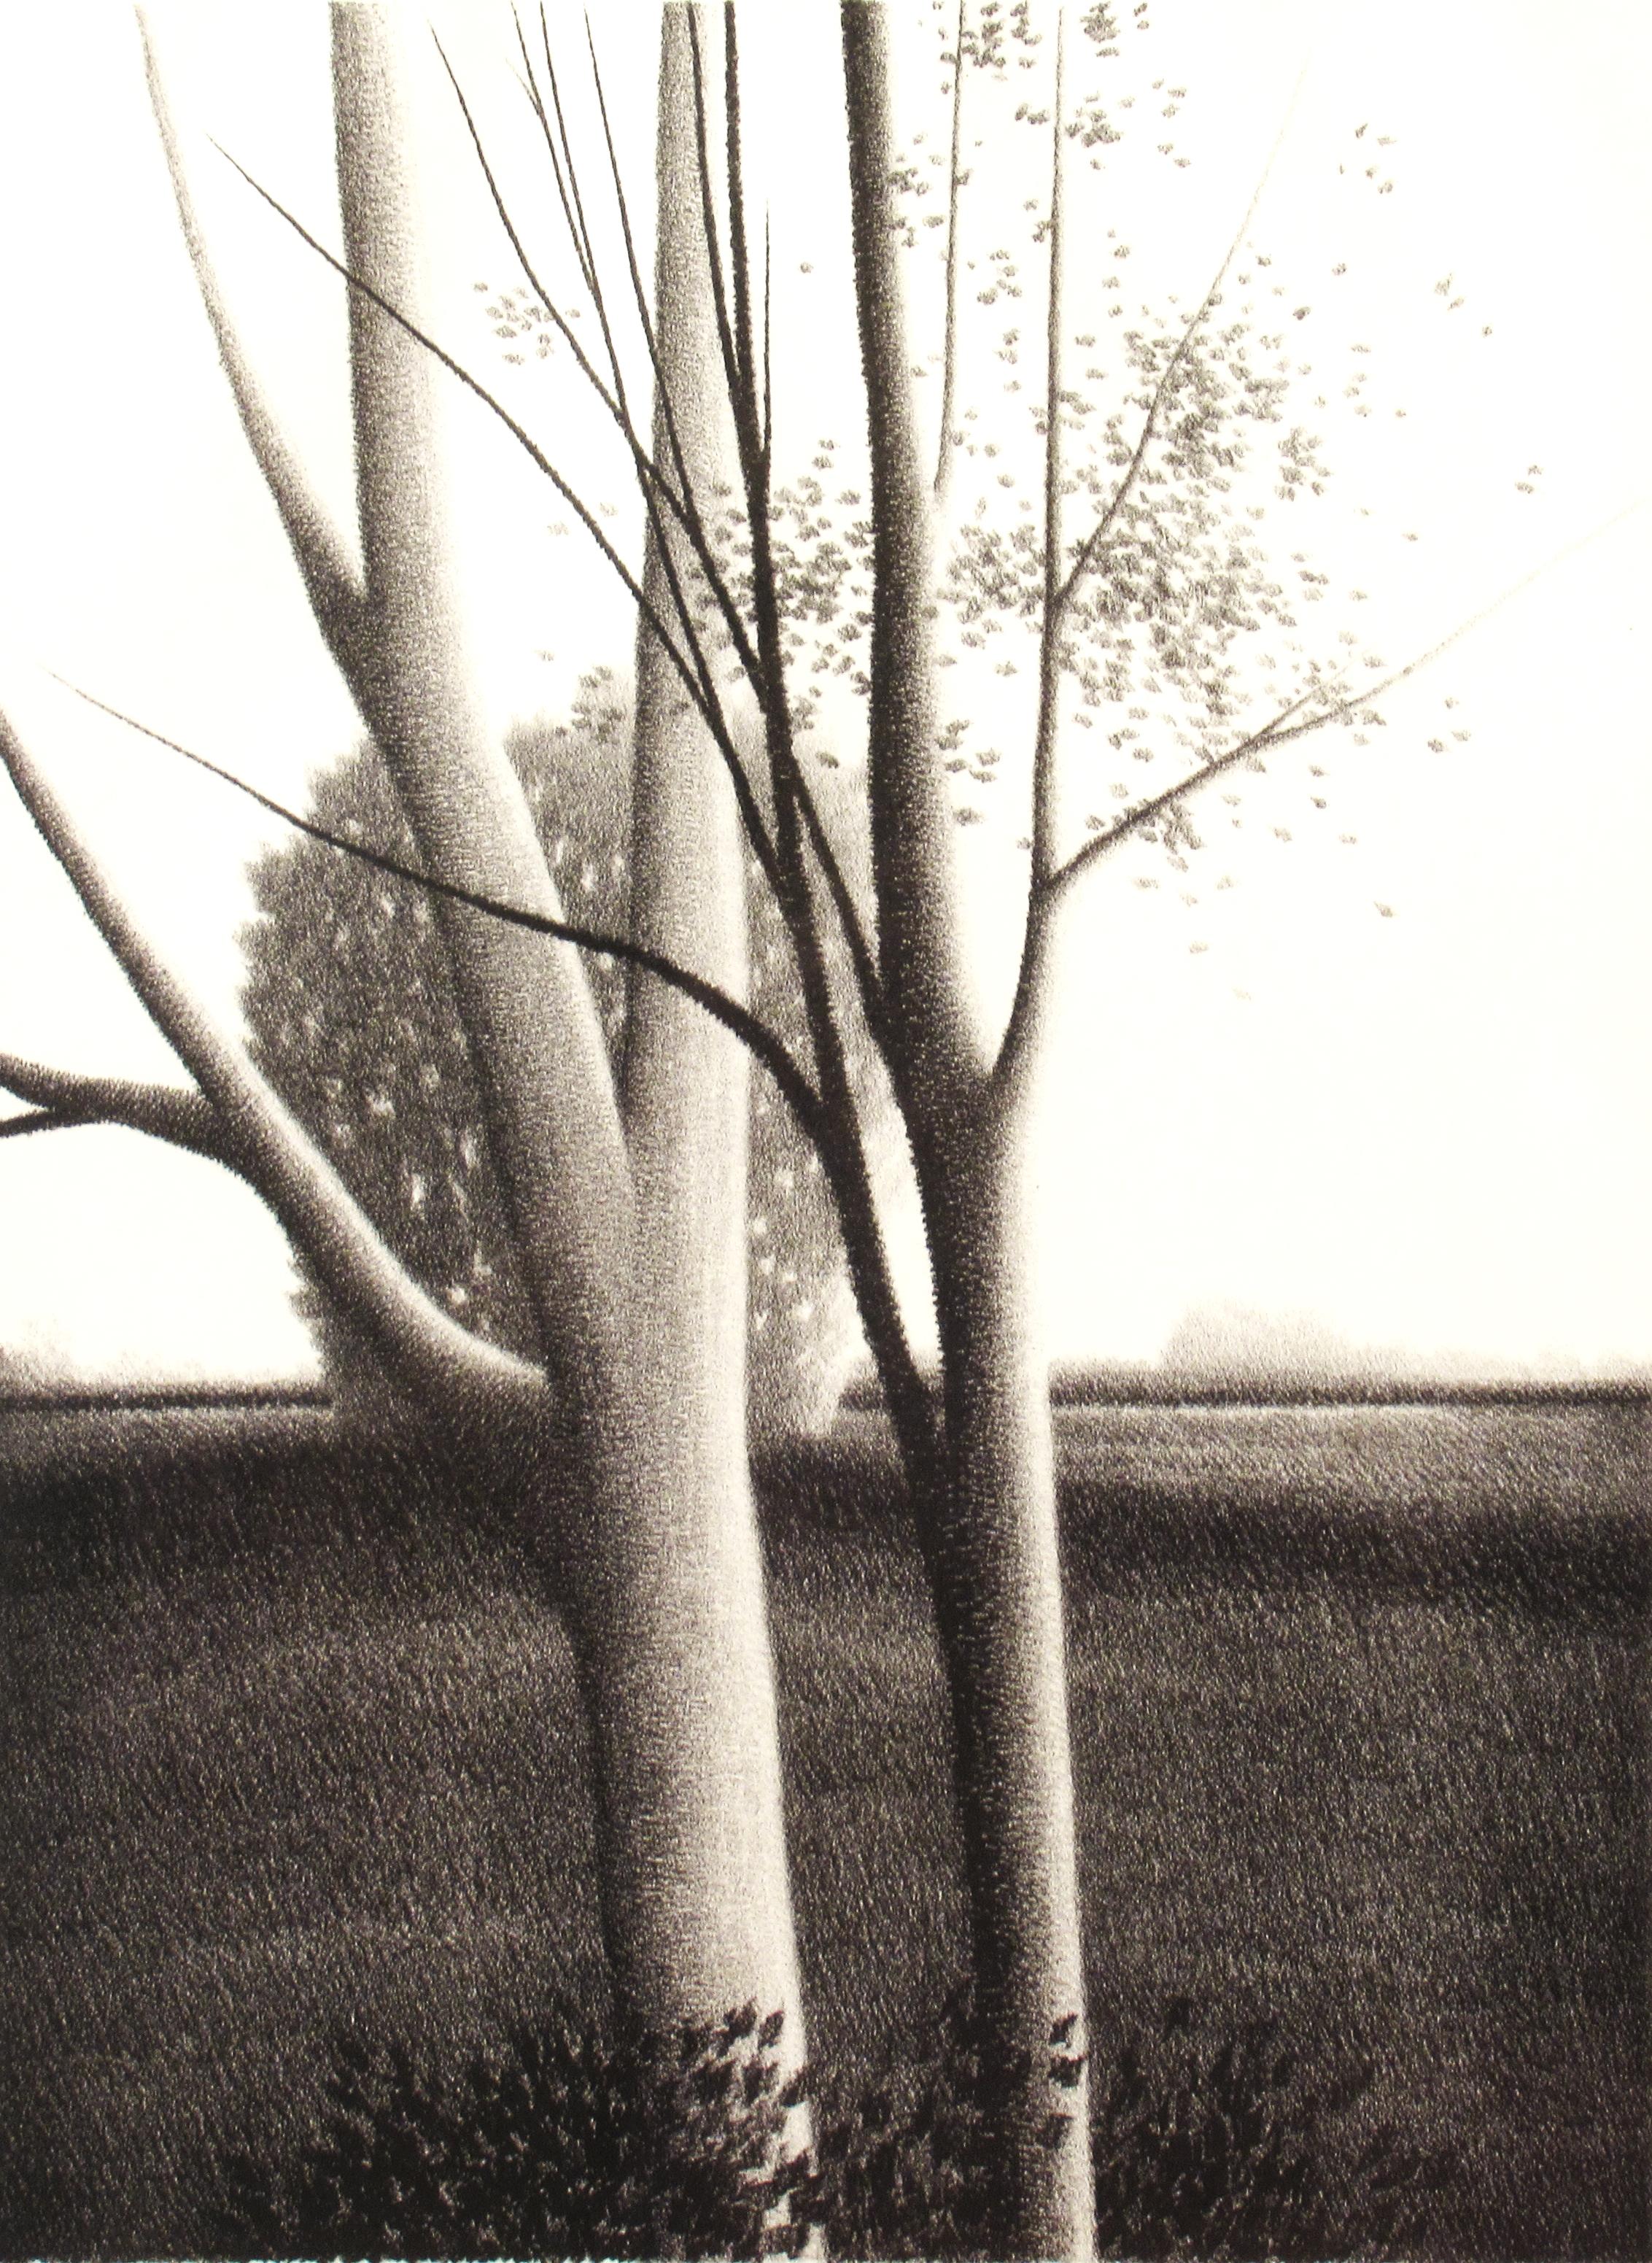 Landscape with Trees - Print by Robert Kipniss